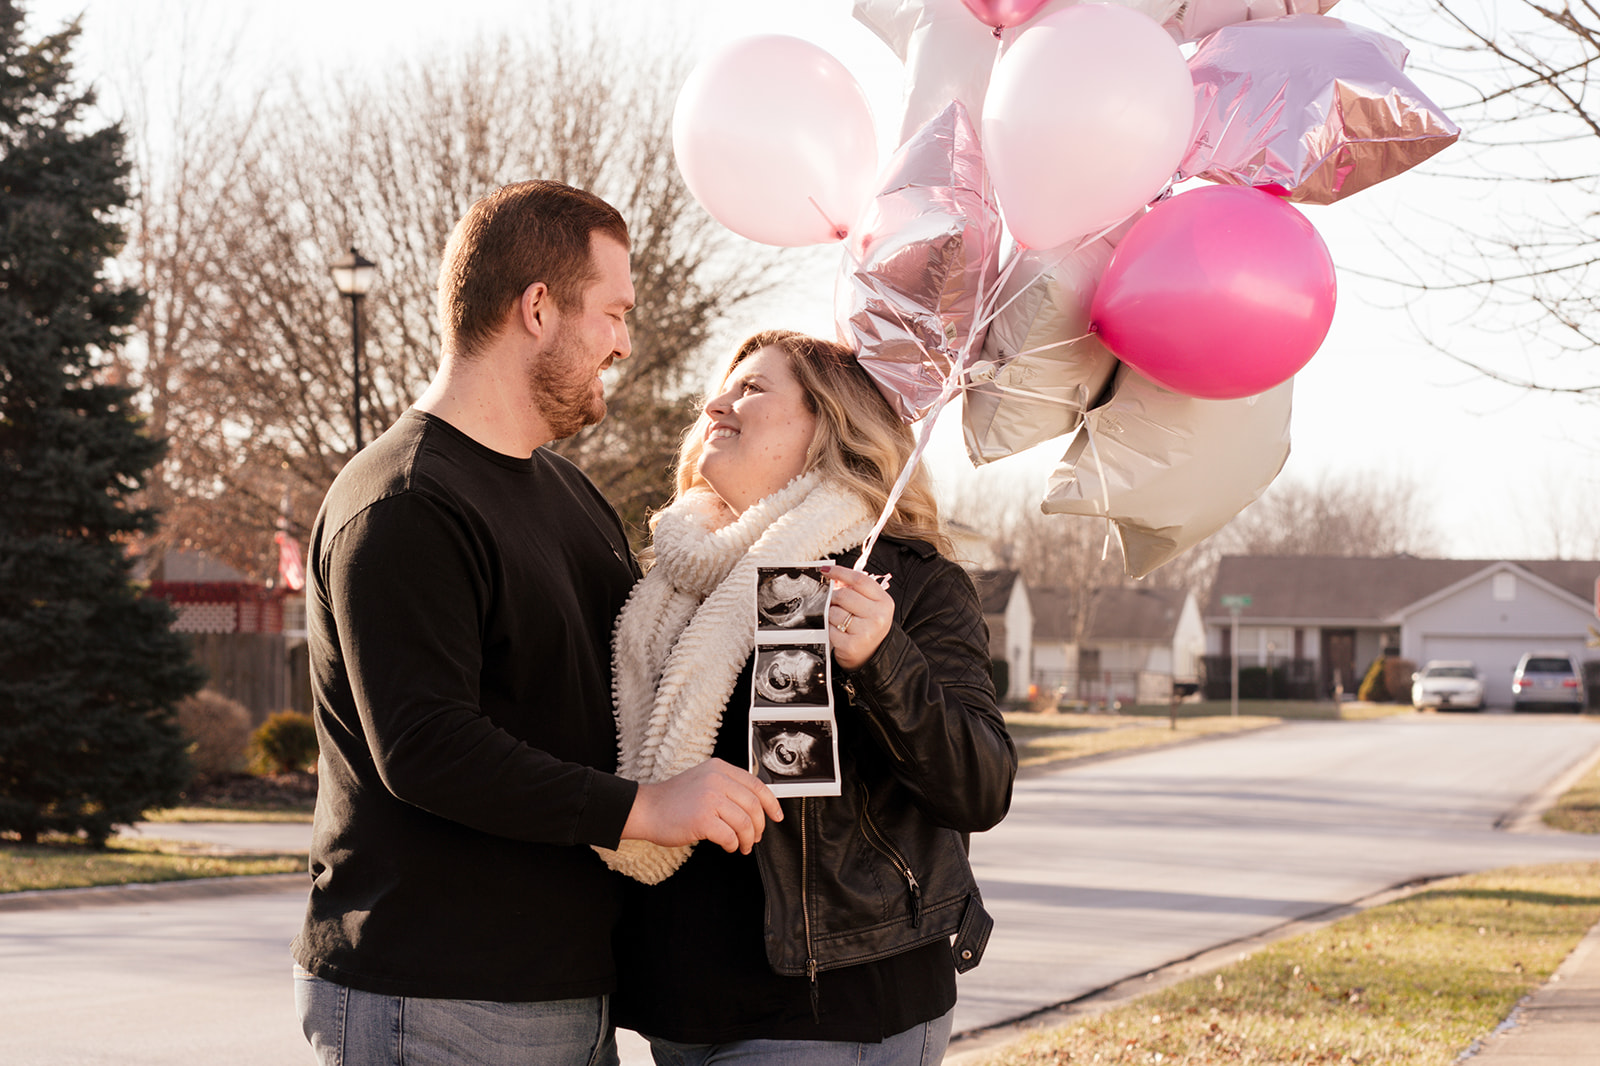 pregnancy announcement with pink balloons